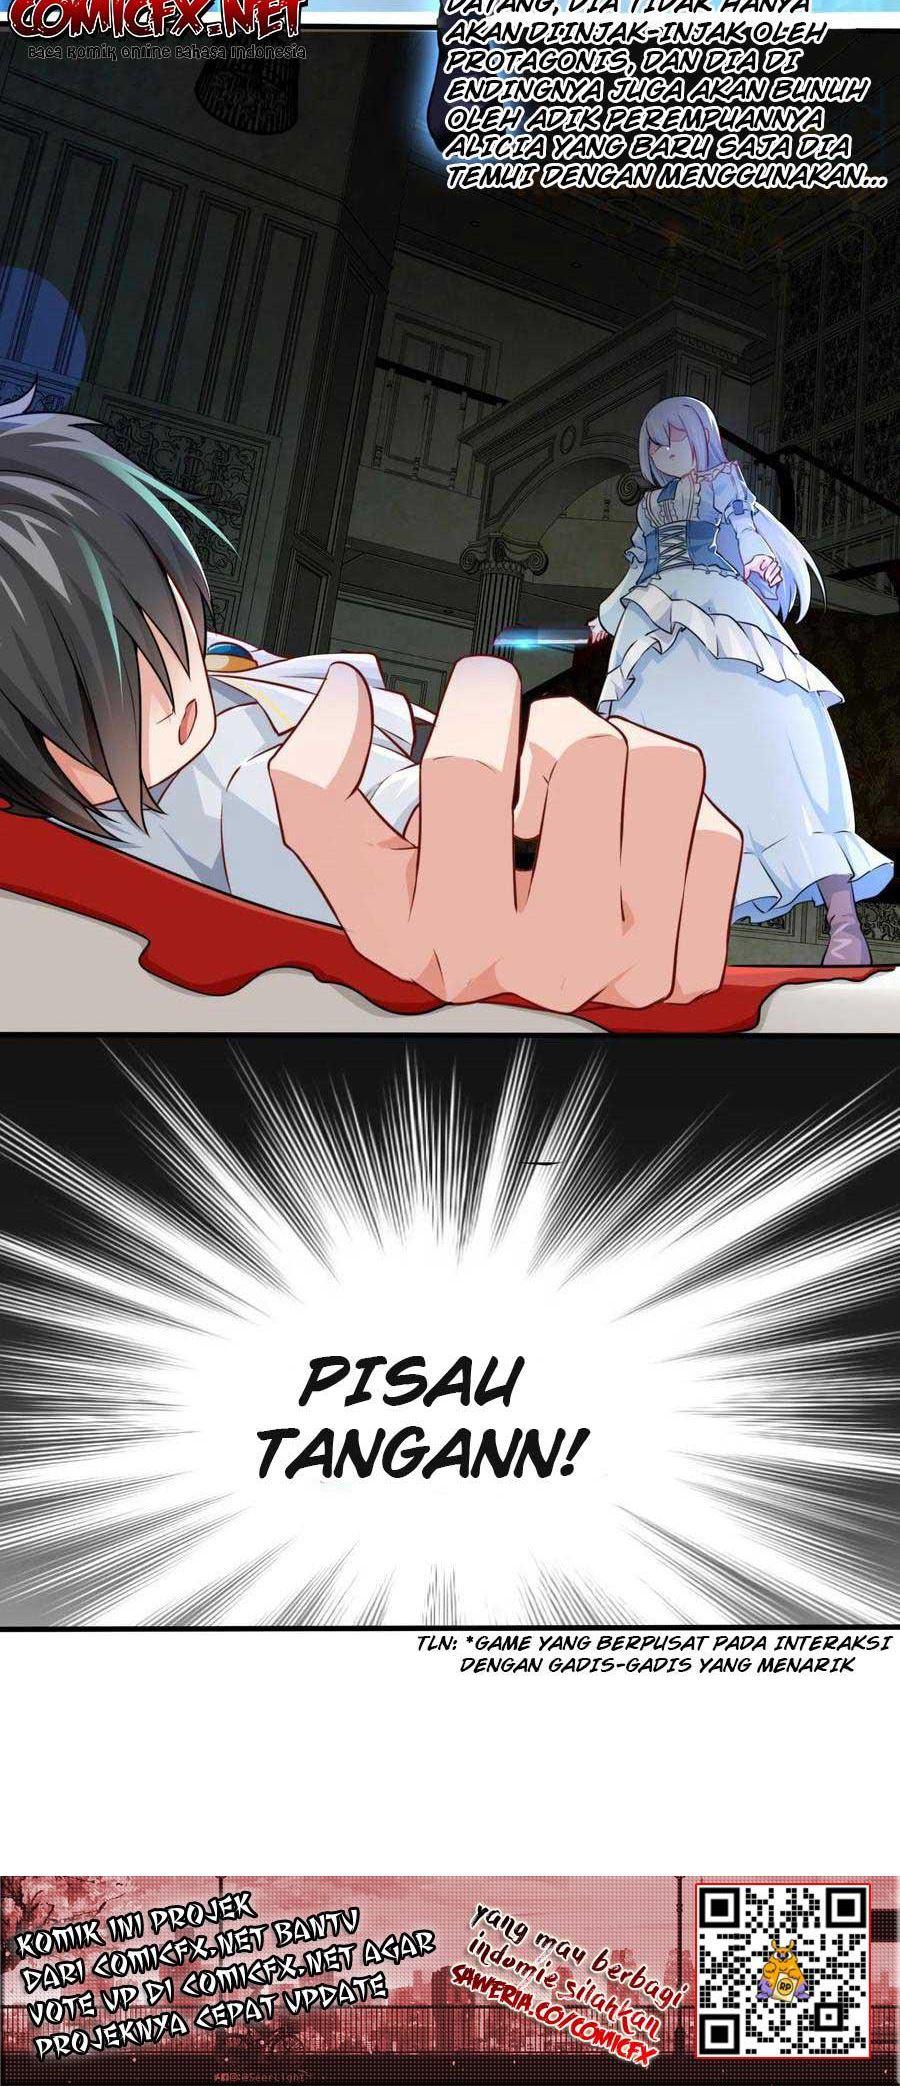 Dilarang COPAS - situs resmi www.mangacanblog.com - Komik little tyrant doesnt want to meet with a bad end 001 - chapter 1 2 Indonesia little tyrant doesnt want to meet with a bad end 001 - chapter 1 Terbaru 6|Baca Manga Komik Indonesia|Mangacan